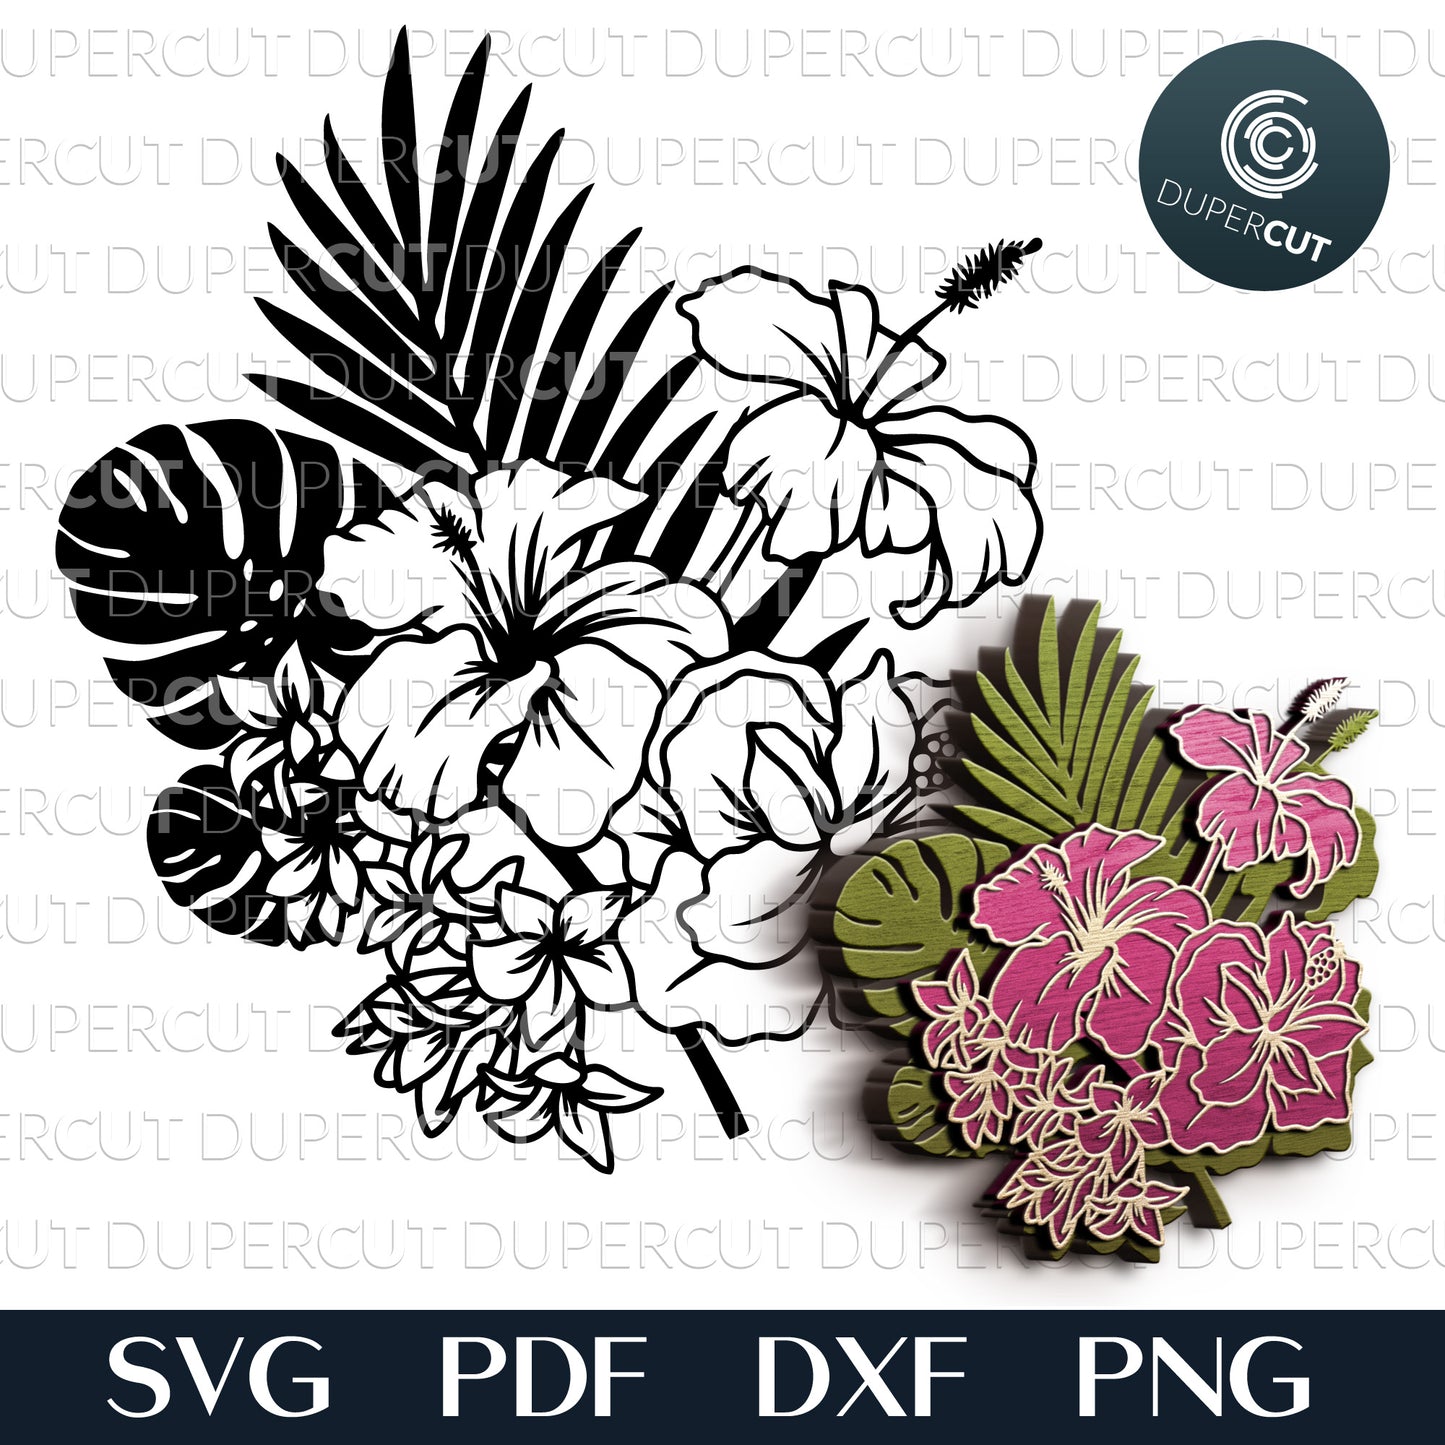 Tropical arrangement - layered cut files - SVG PDF DXF vector template for Glowforge, laser cutting machines, engraving, Cricut, Silhouette cameo